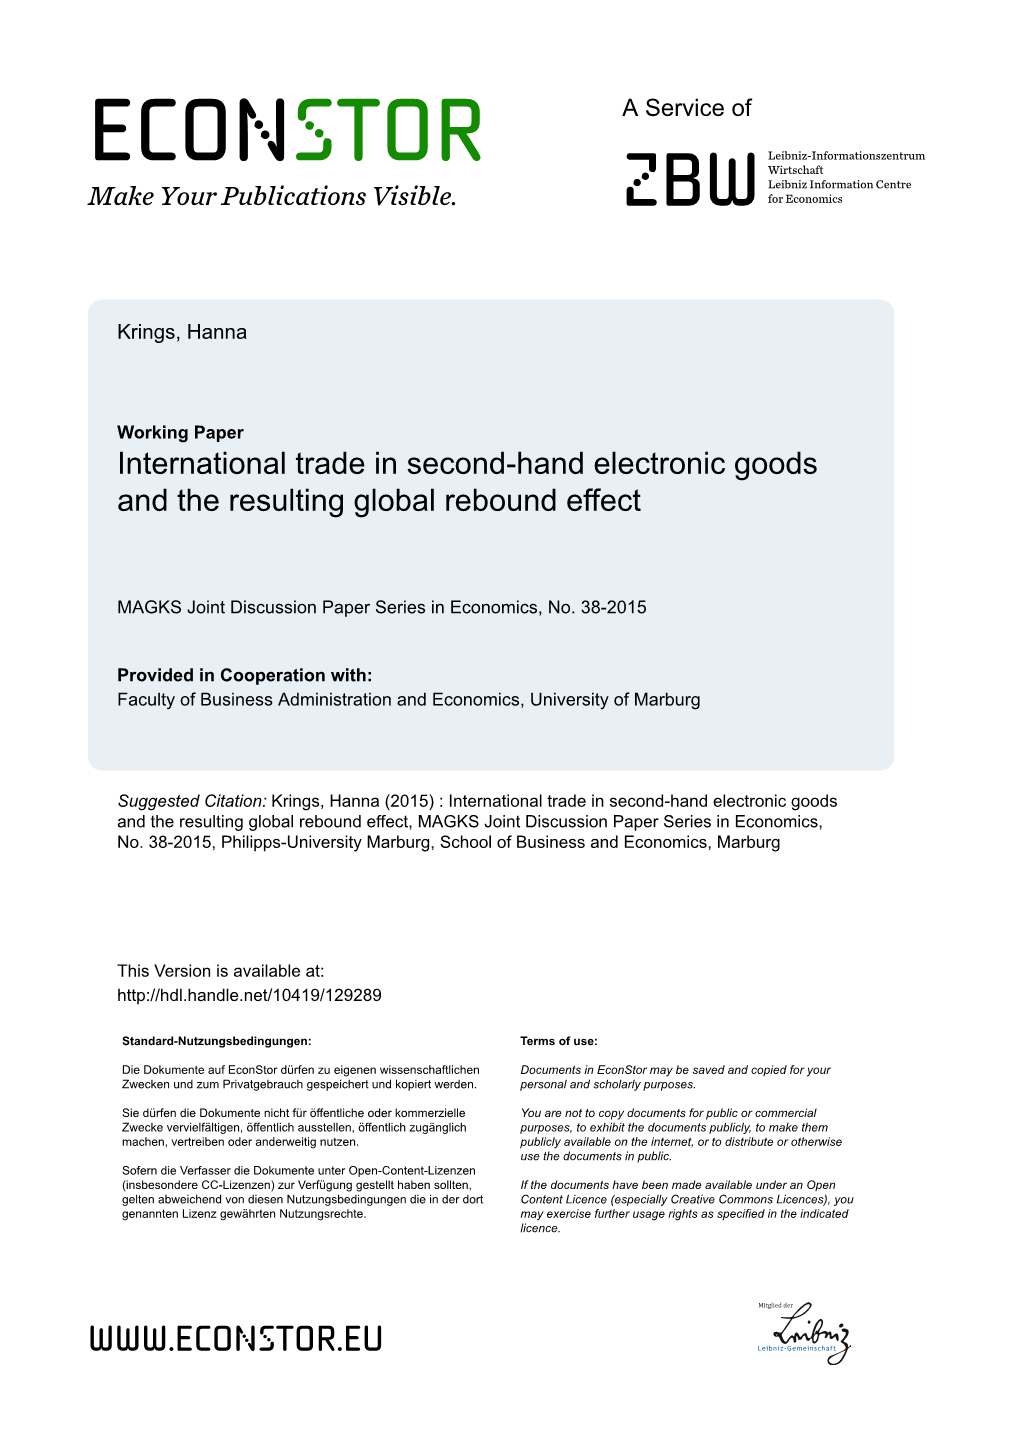 International Trade in Second-Hand Electronic Goods and the Resulting Global Rebound Effect